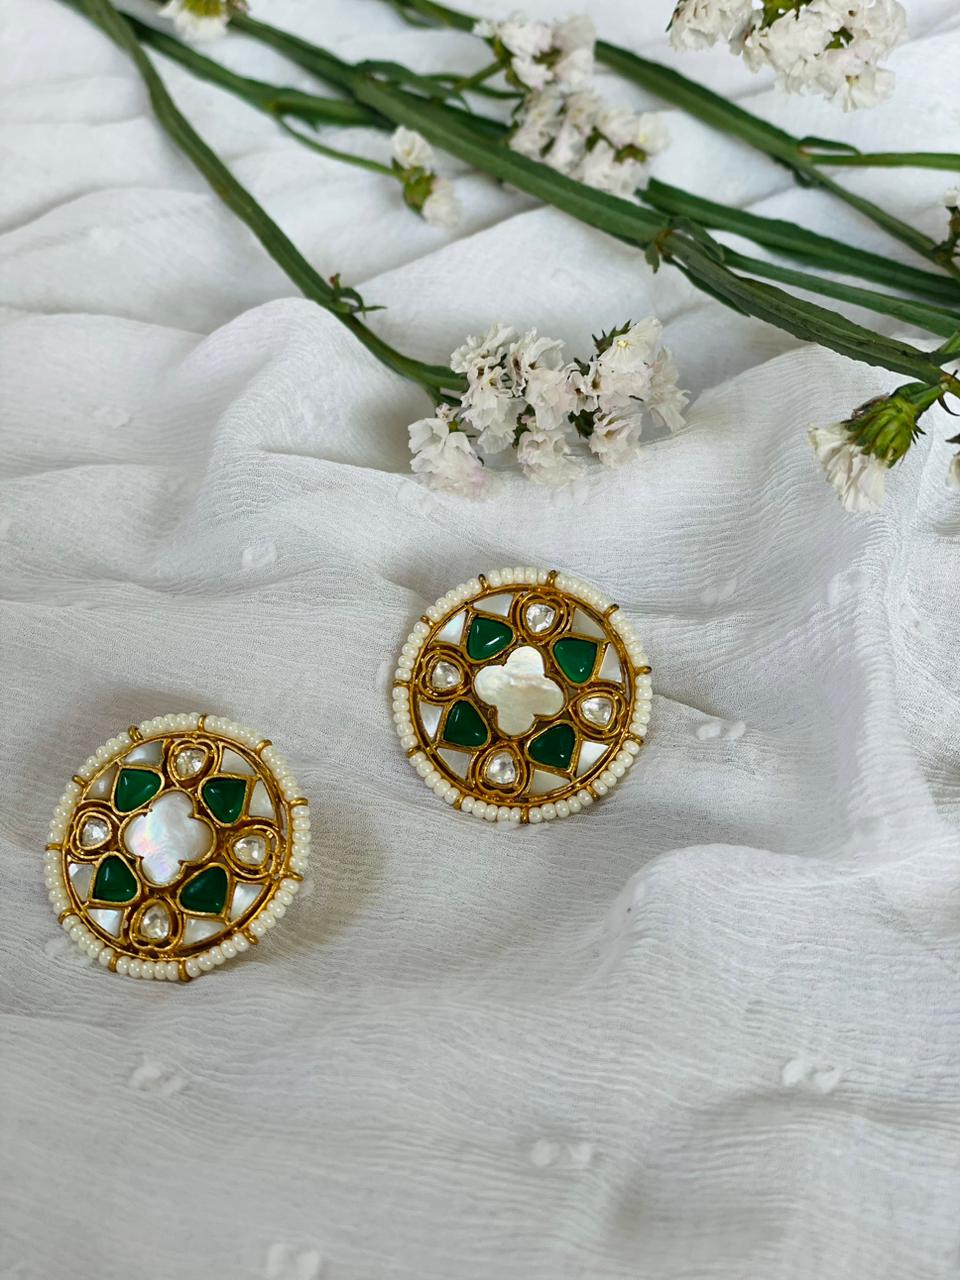 THE BUTTERFLY EFFECT JEWELRY - Circle Stud with green and white semi-precious